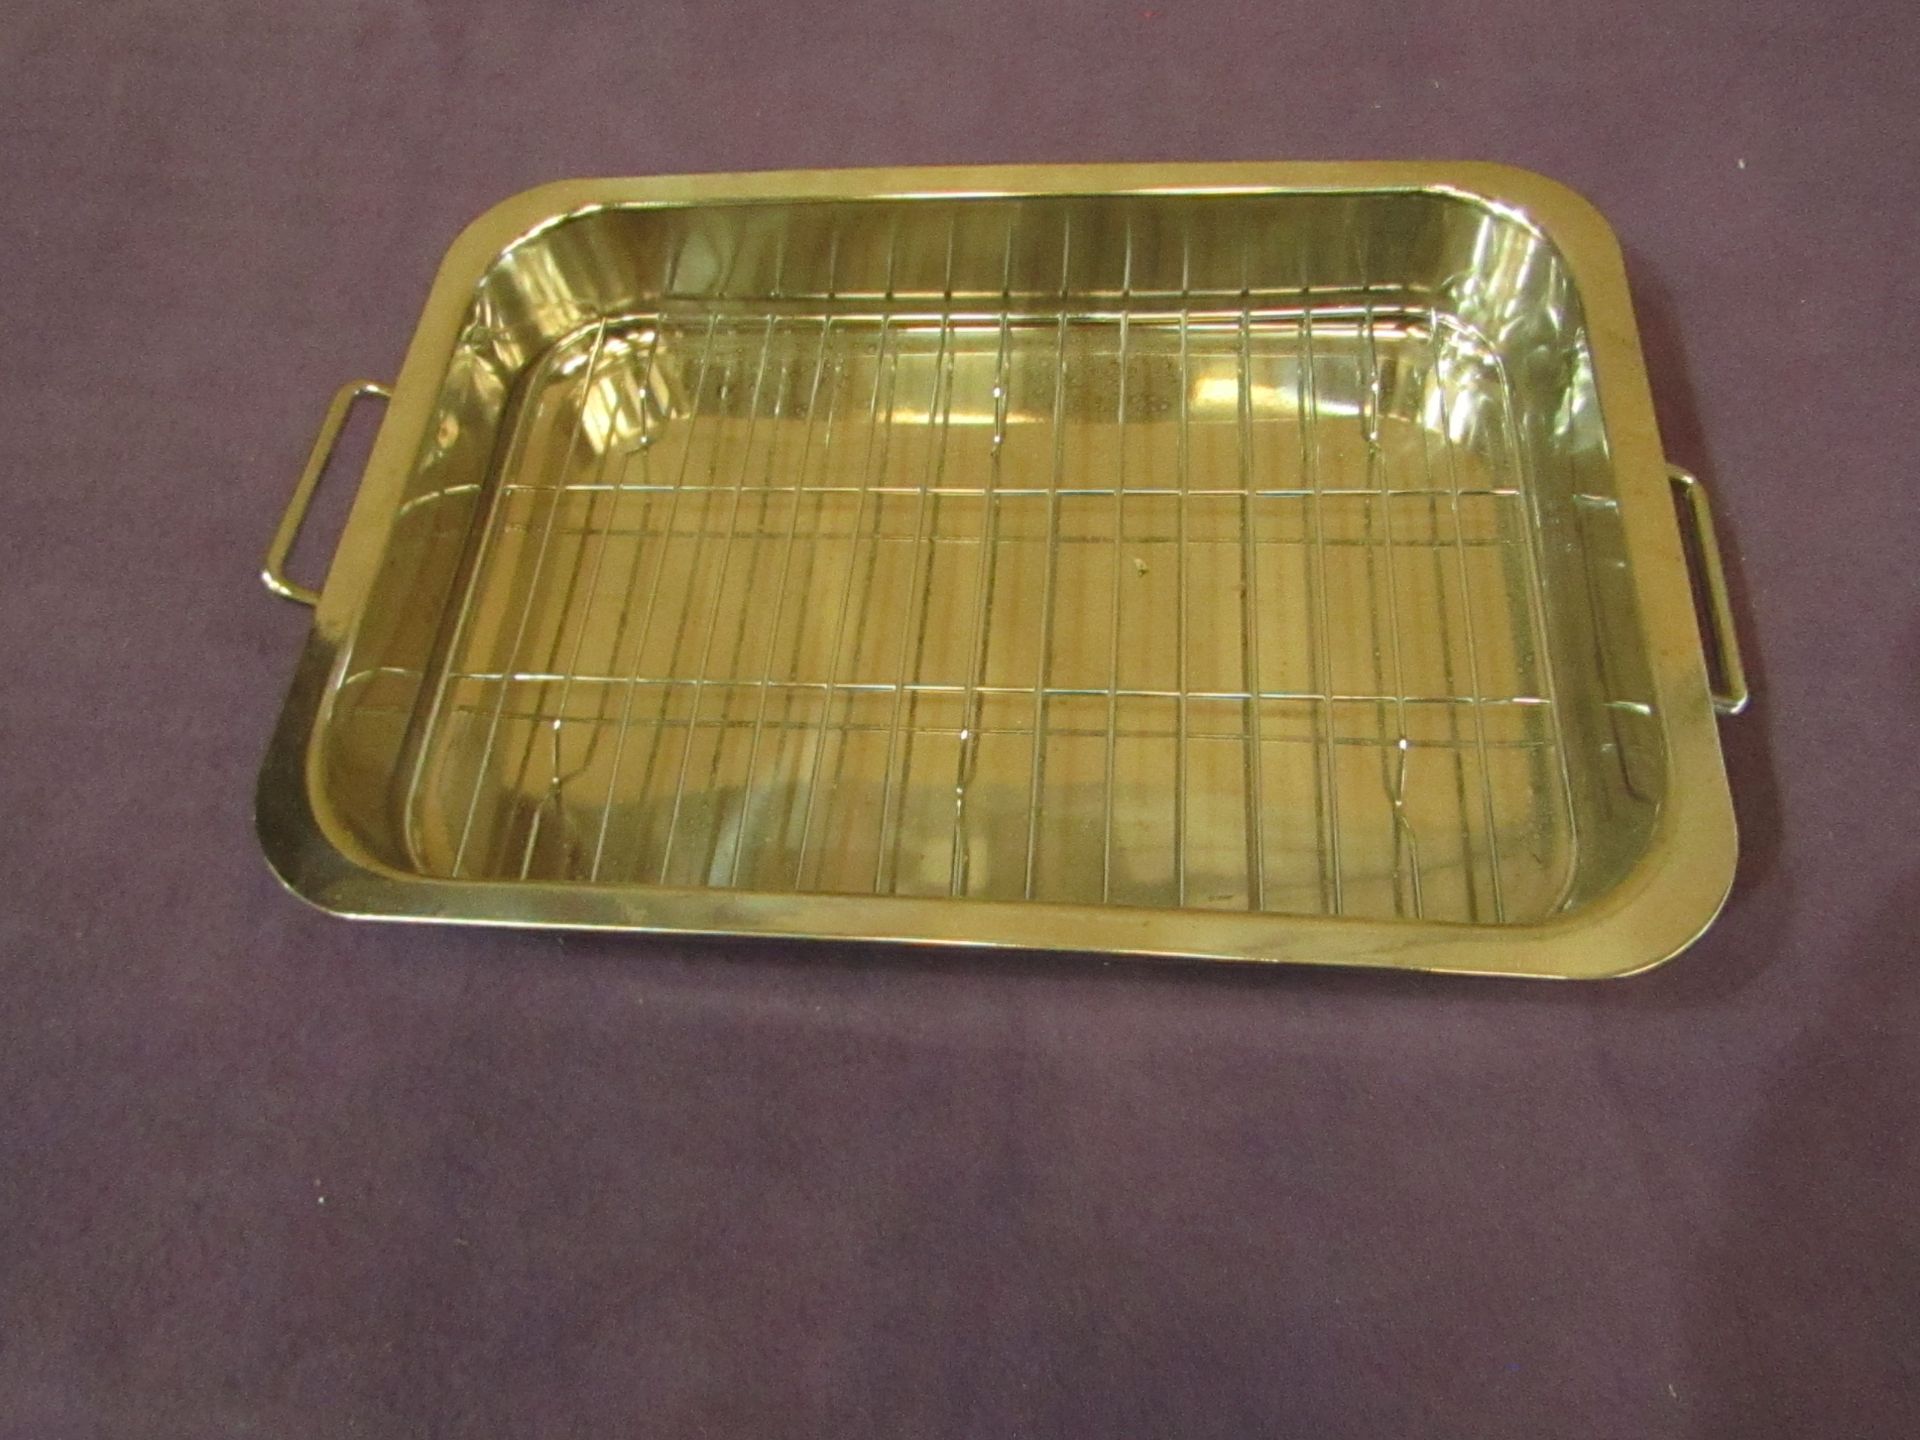 2x Stainless Steel Baking Tray with Baking Dish - New & Boxed.